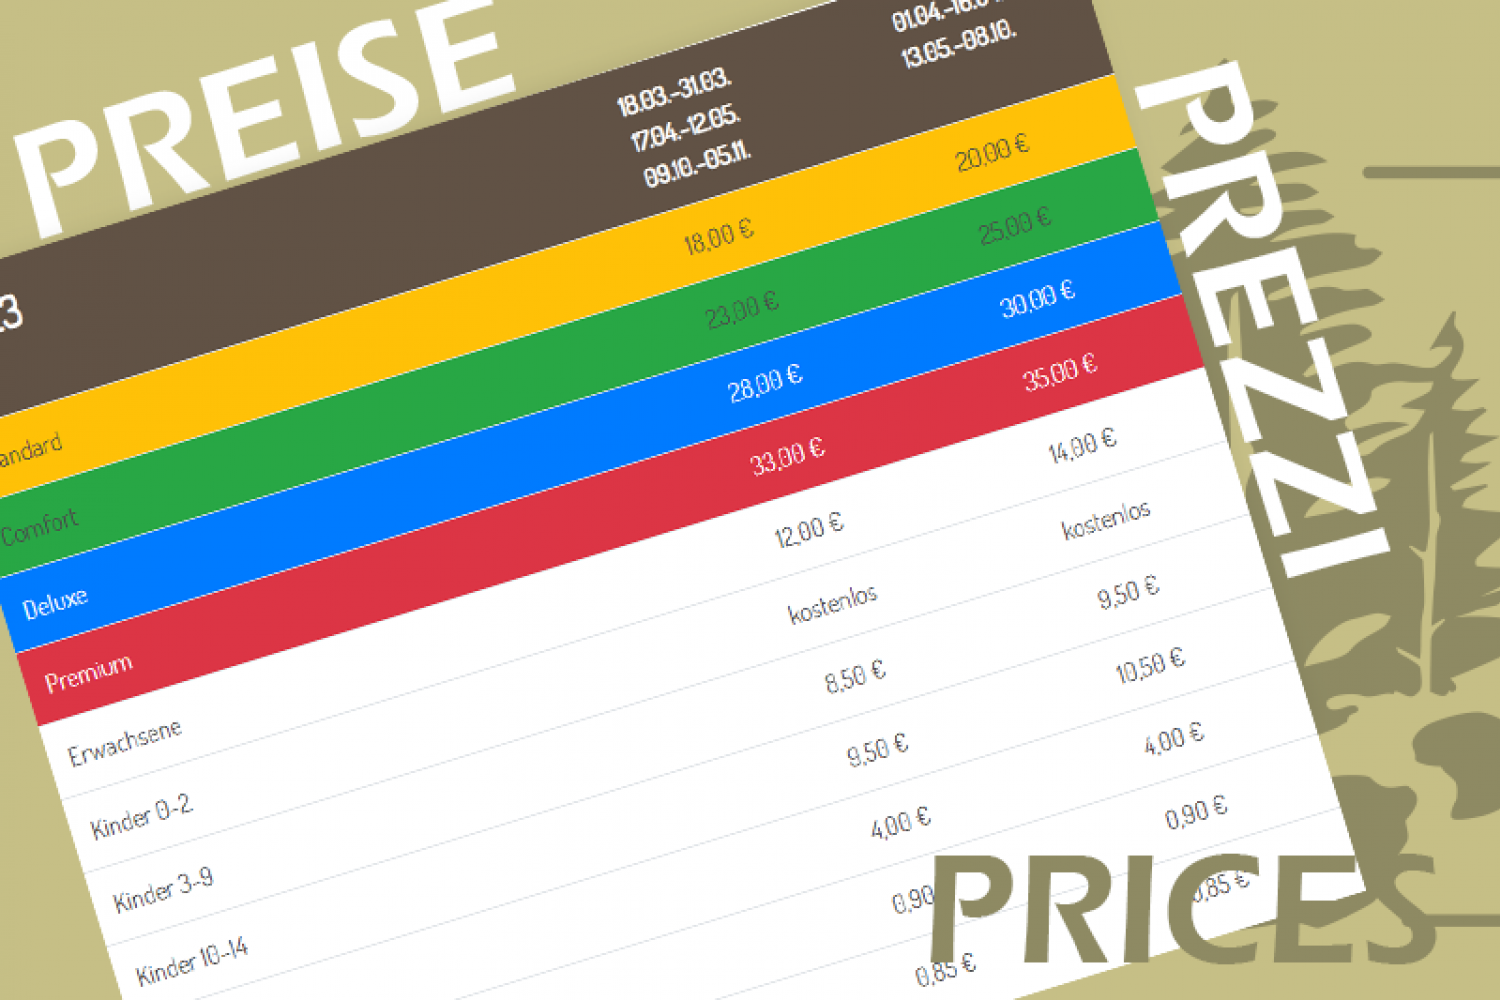 Prices and regulations